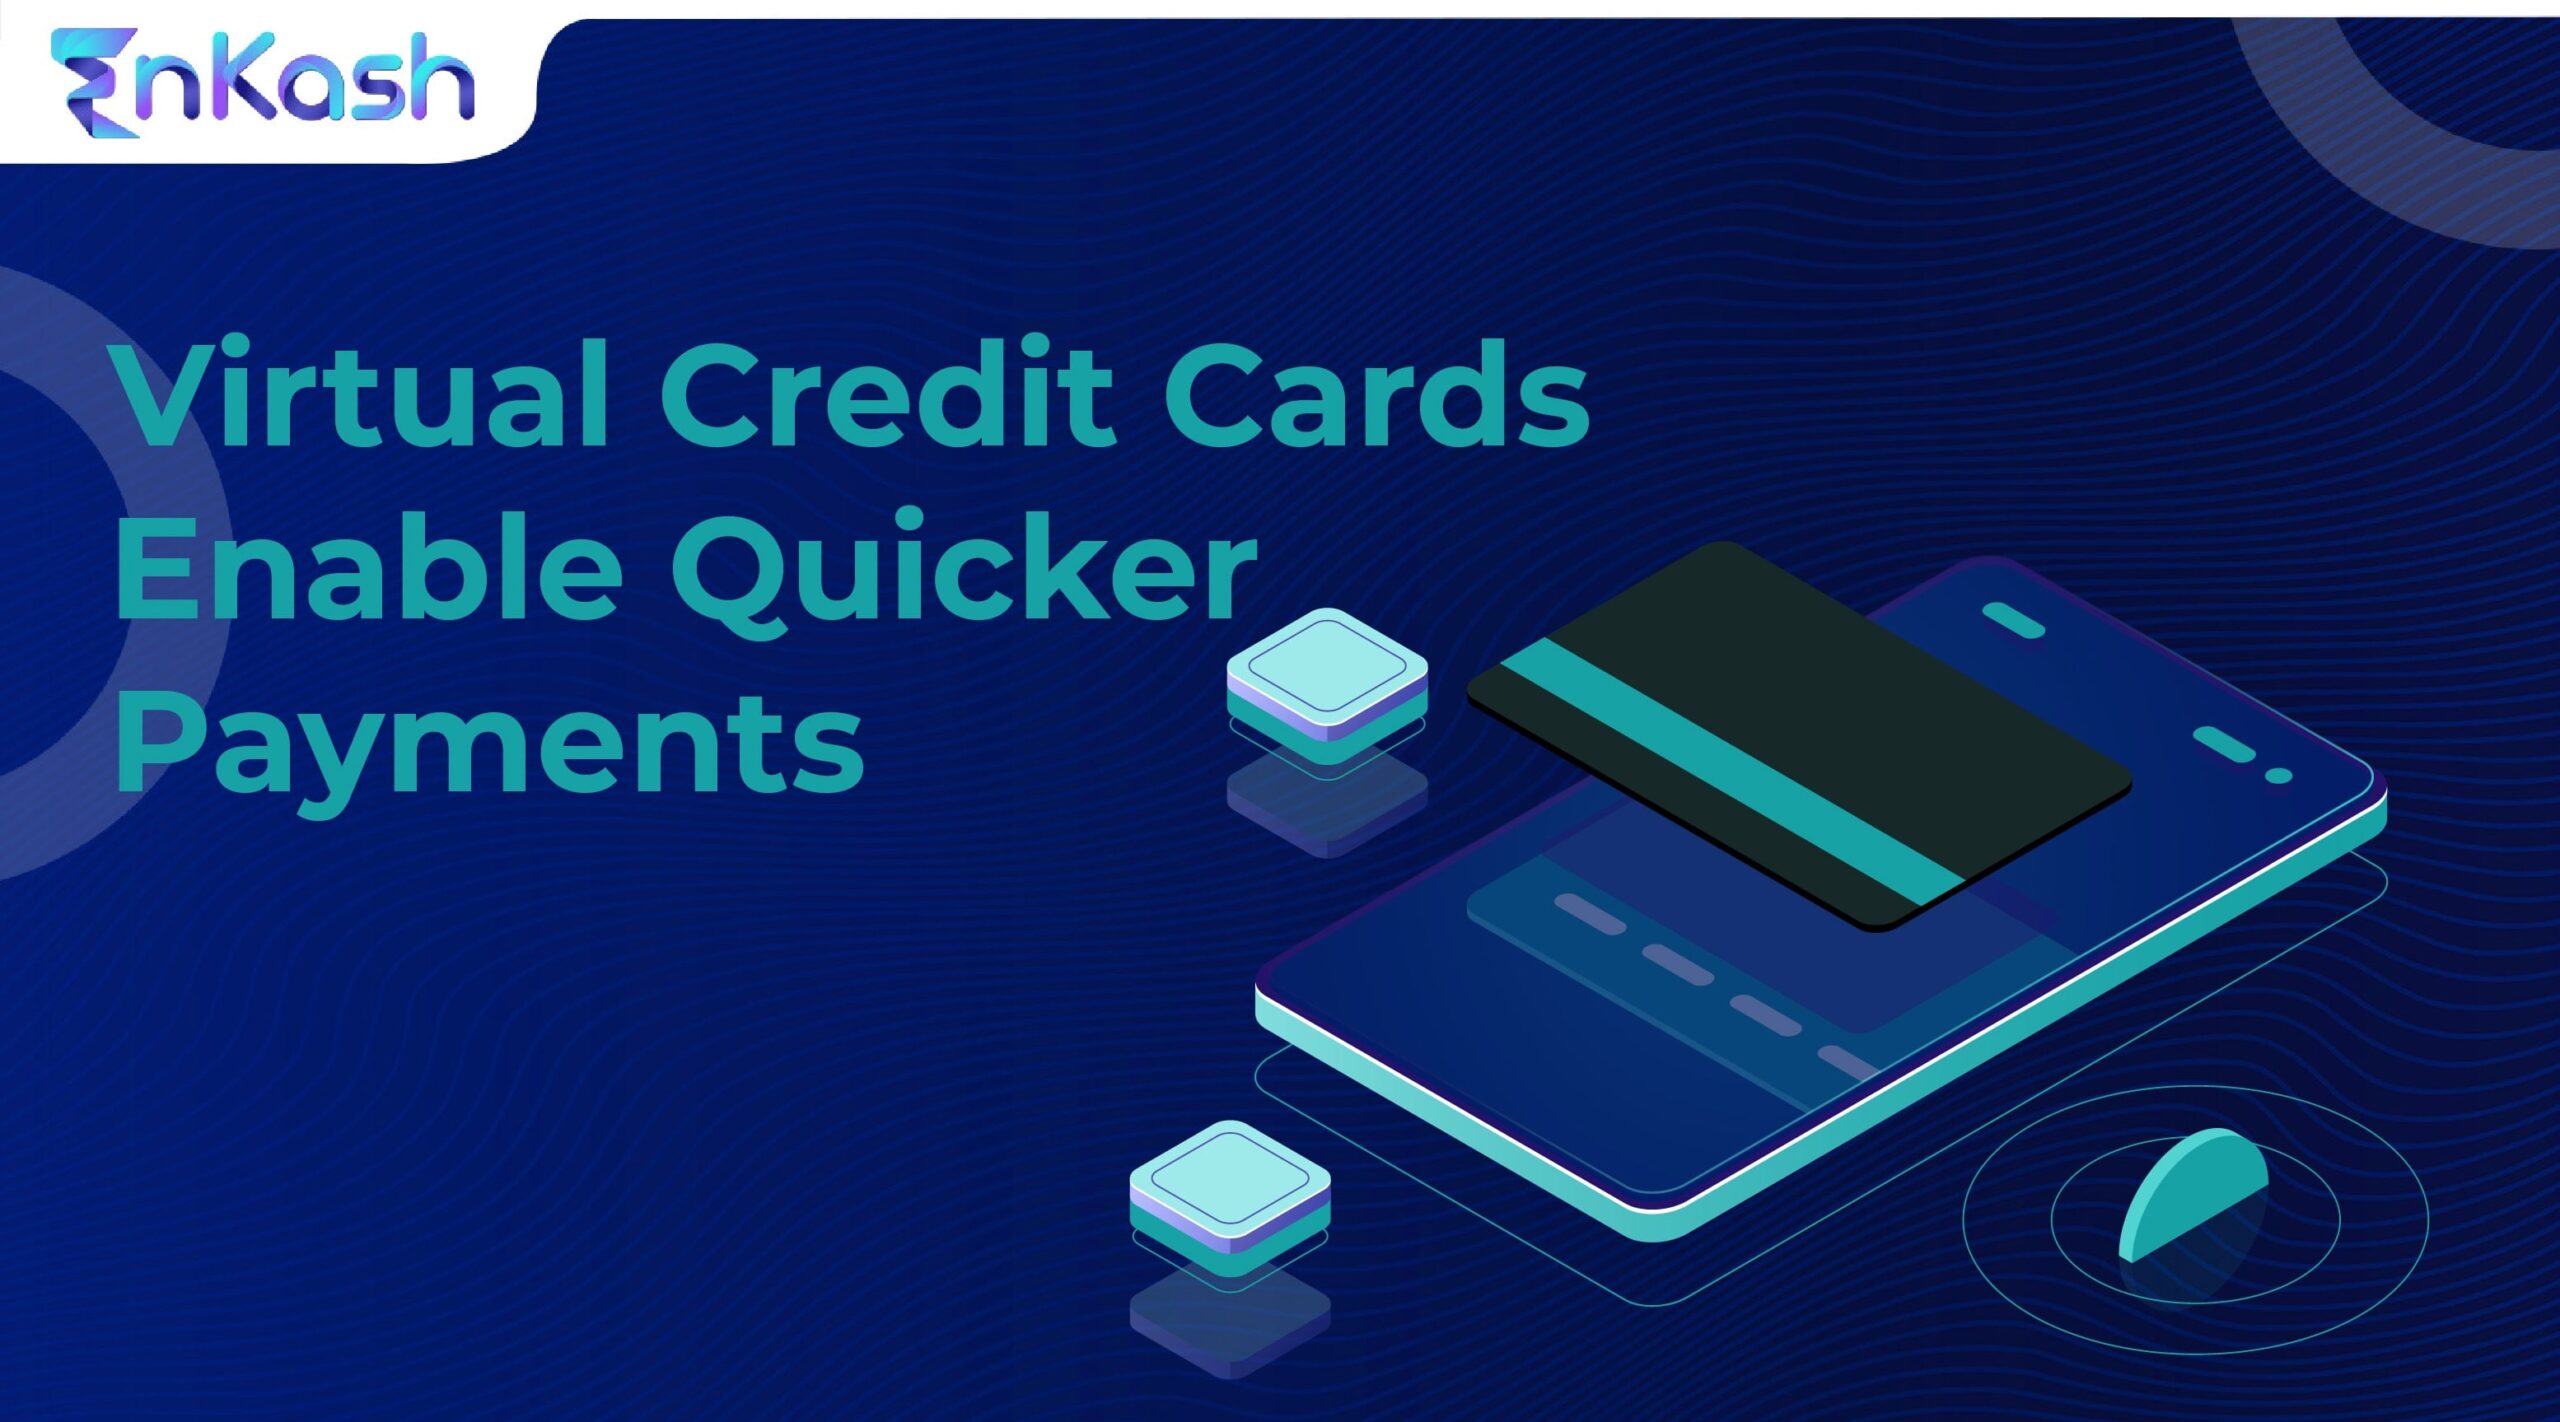 Virtual Credit Cards Enable Quicker Payments